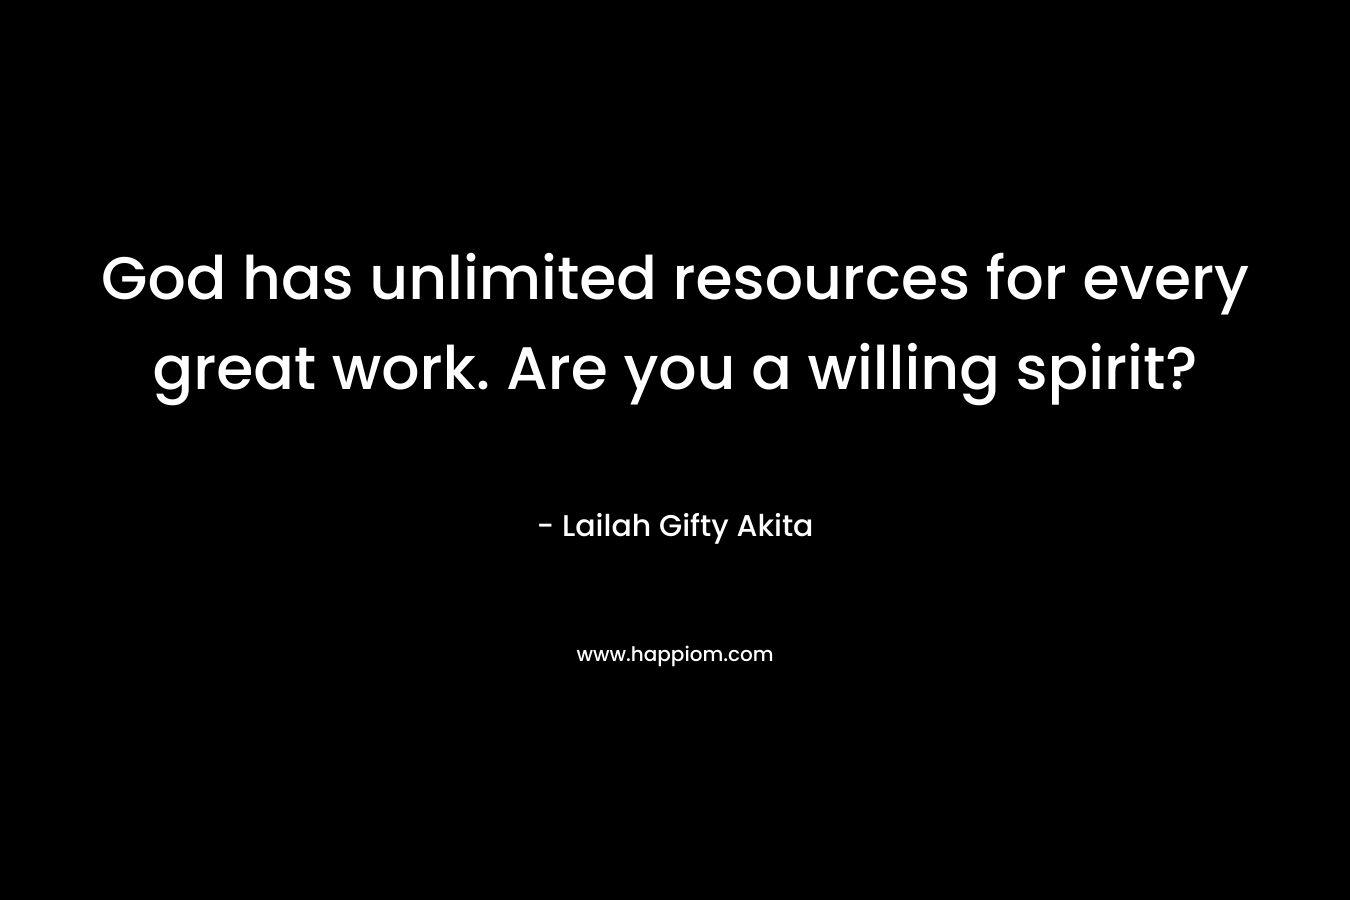 God has unlimited resources for every great work. Are you a willing spirit? – Lailah Gifty Akita